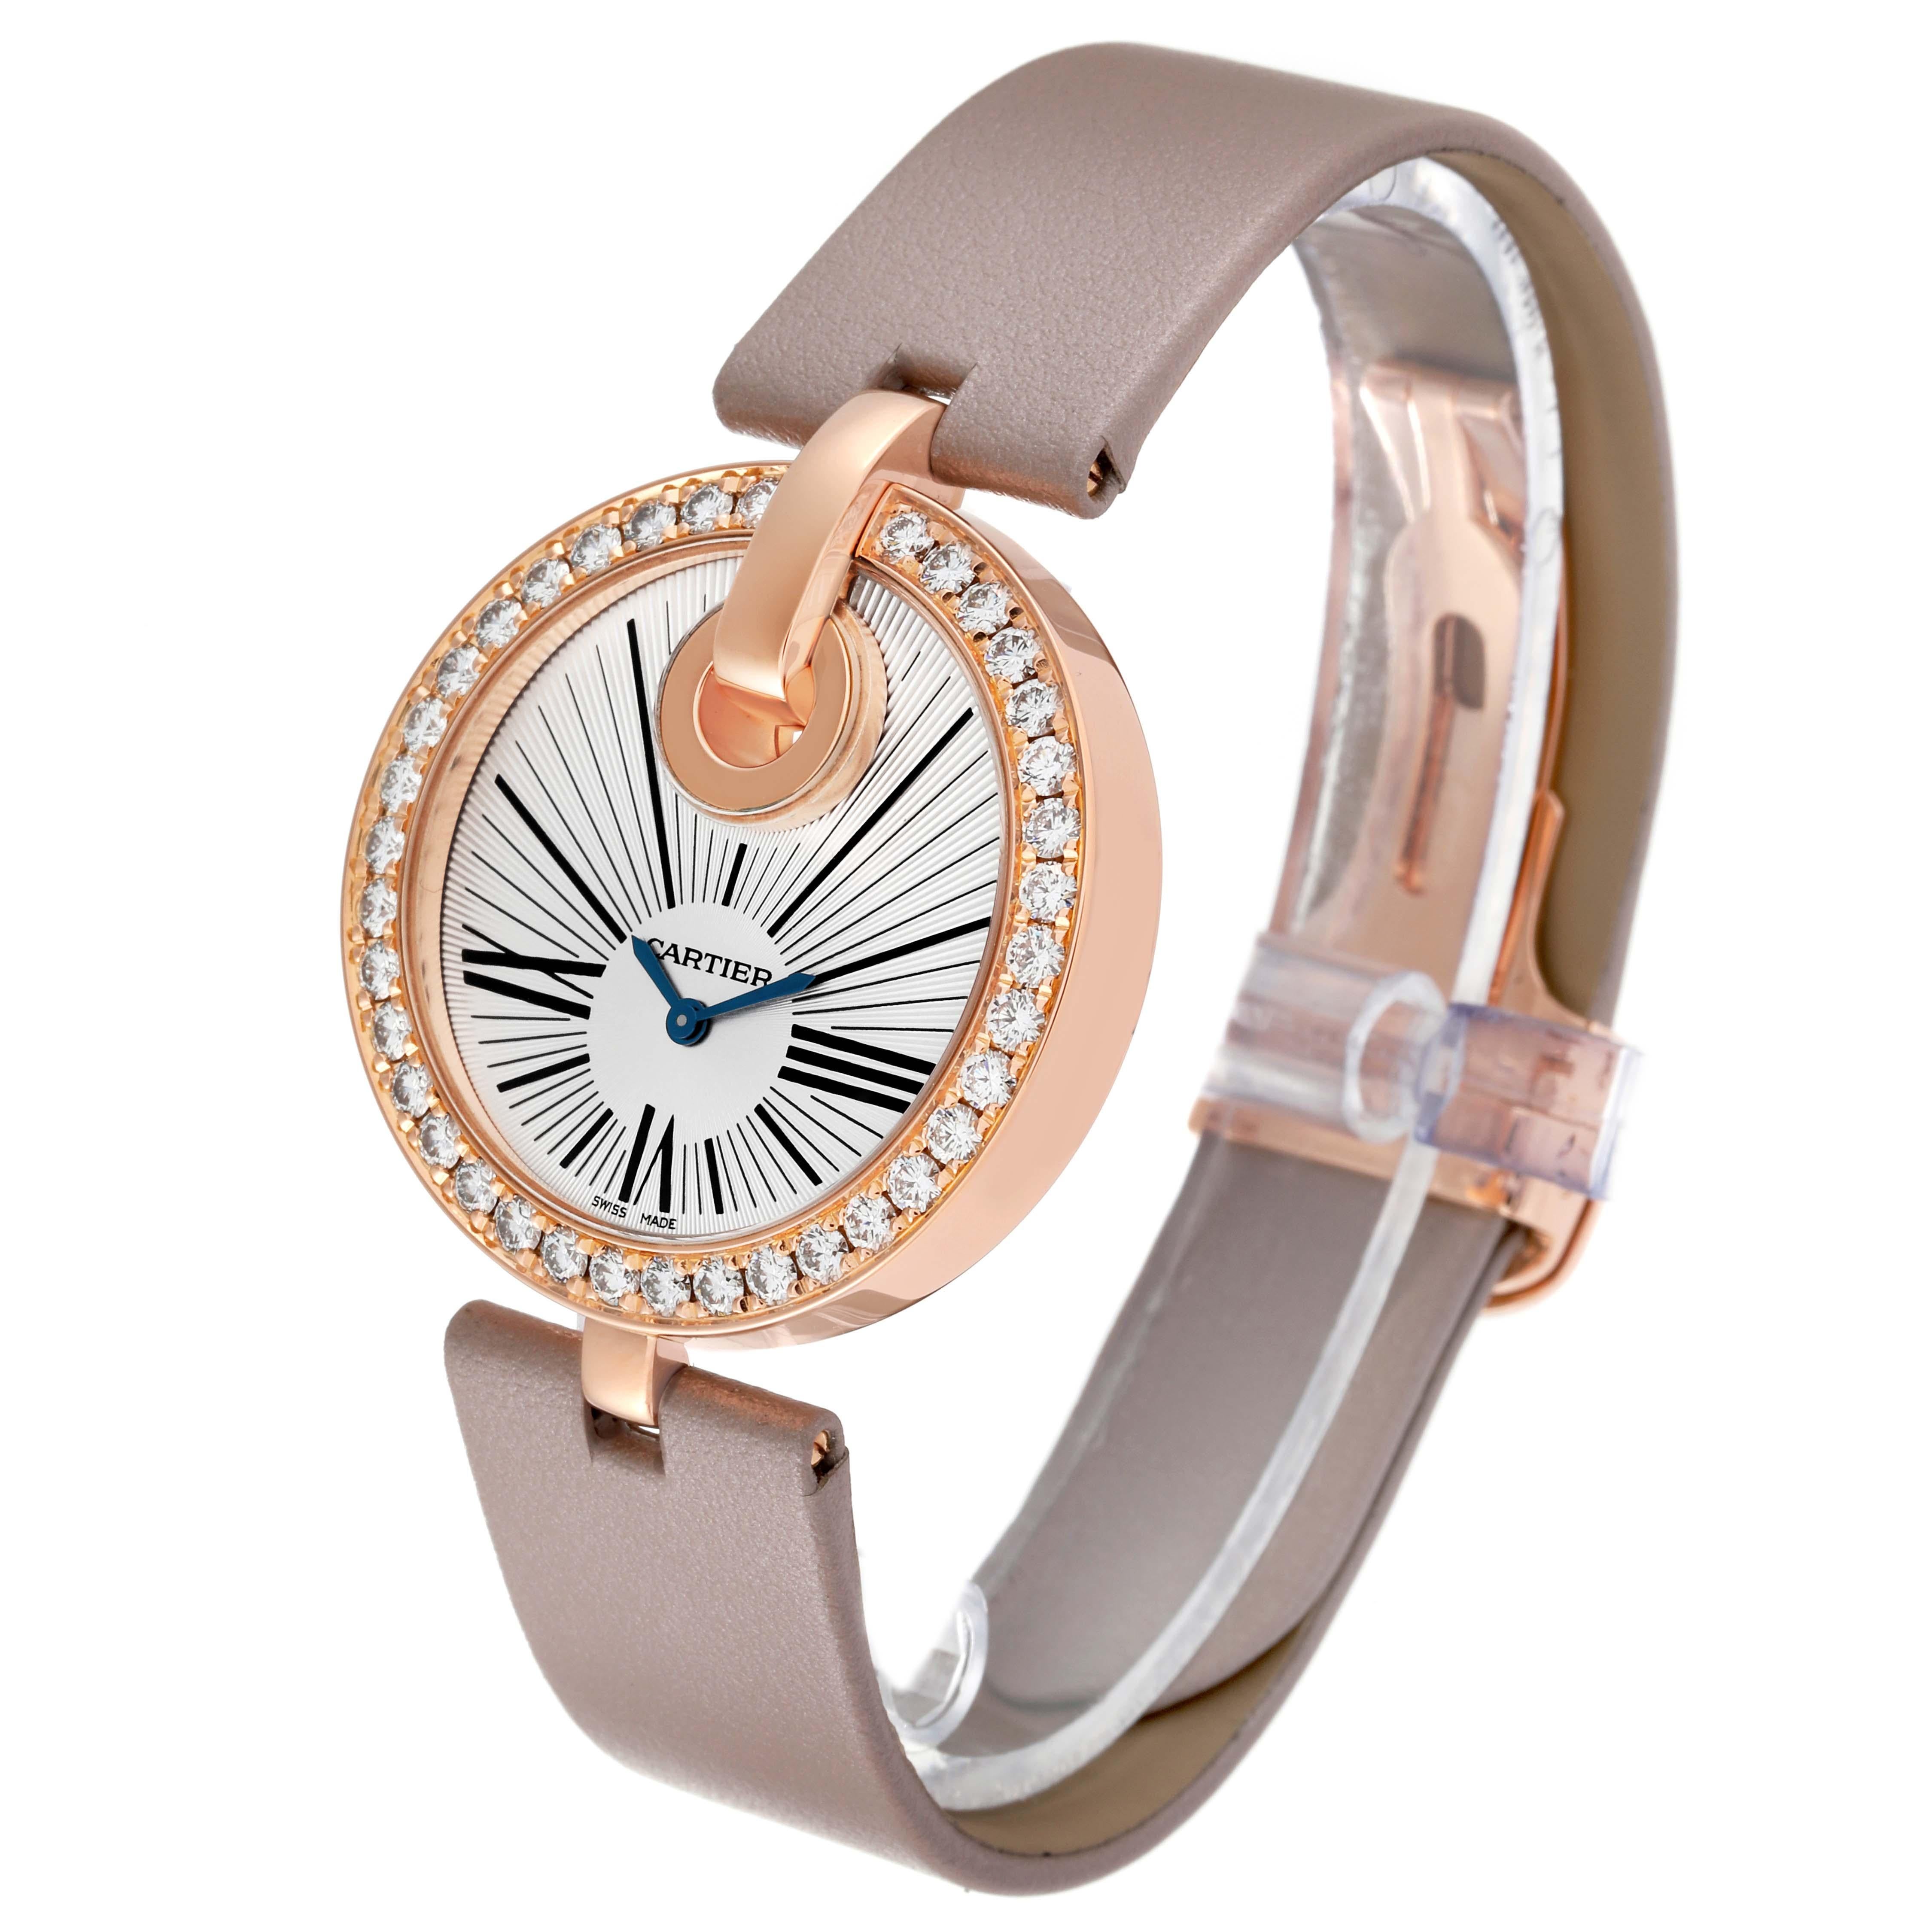 Cartier Captive Rose Gold Diamond Ladies Watch WG600011 For Sale 4